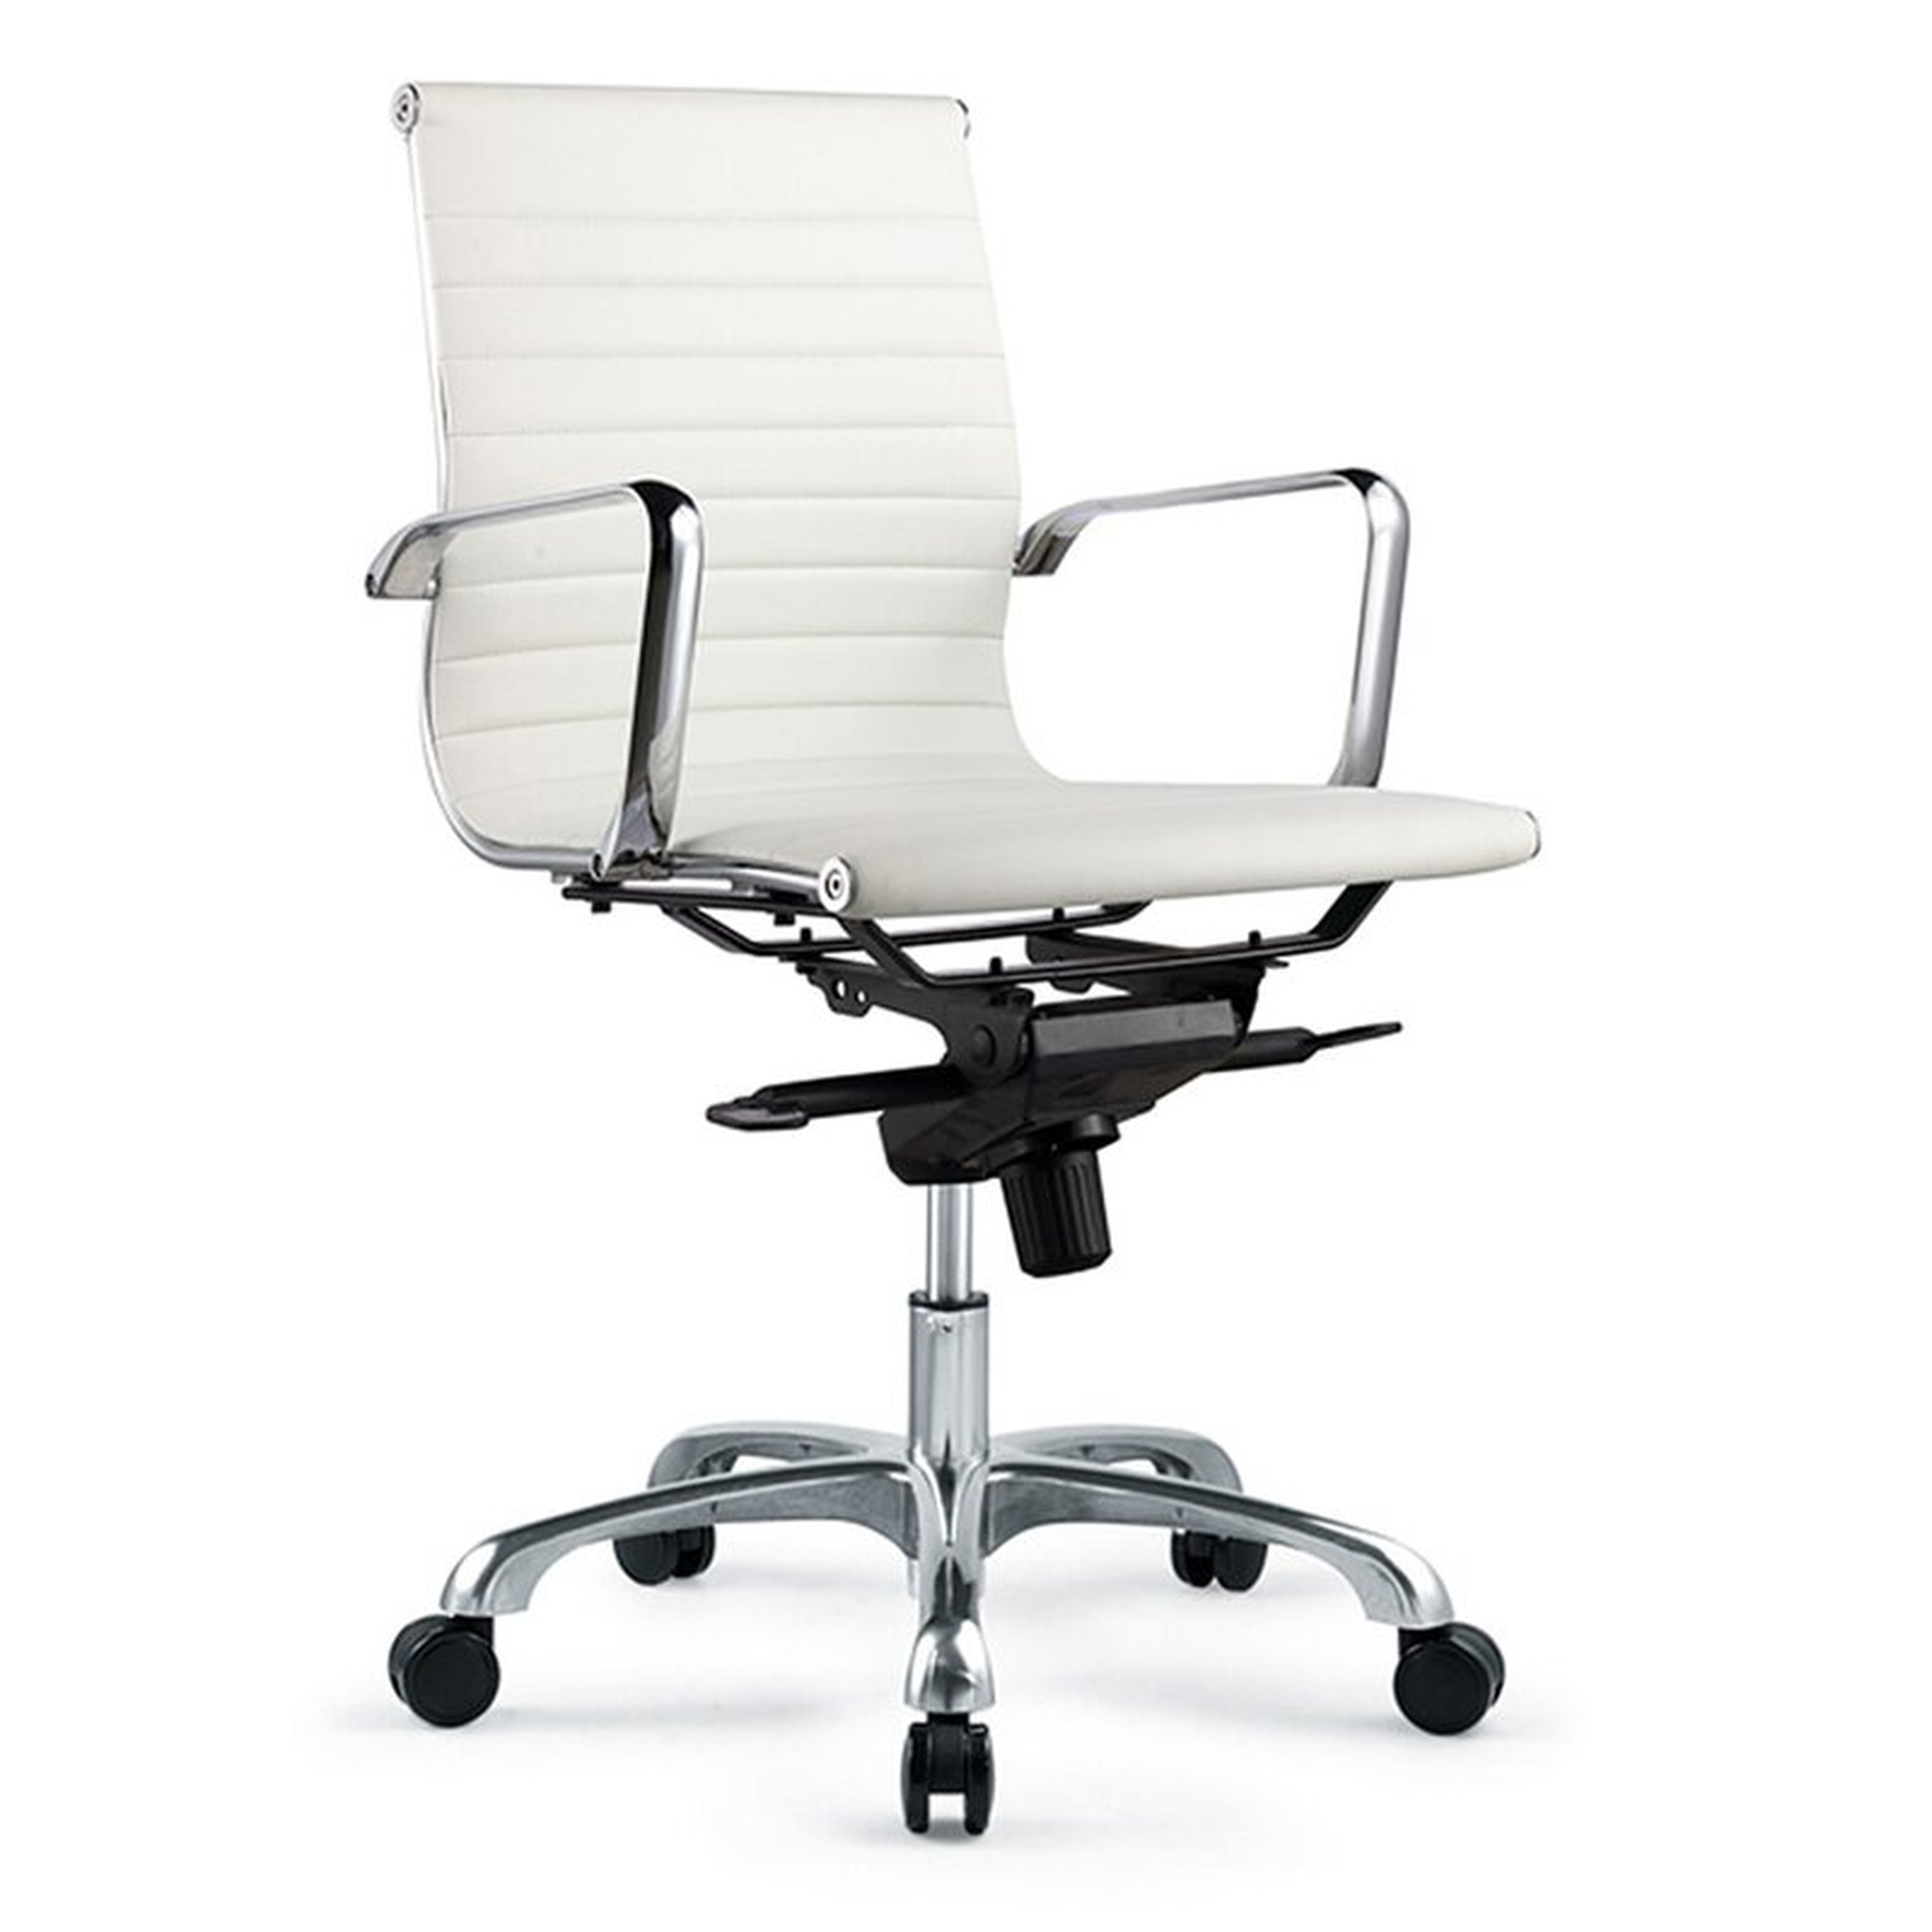 Omega Conference Chair Upholstery Color: White - Perigold